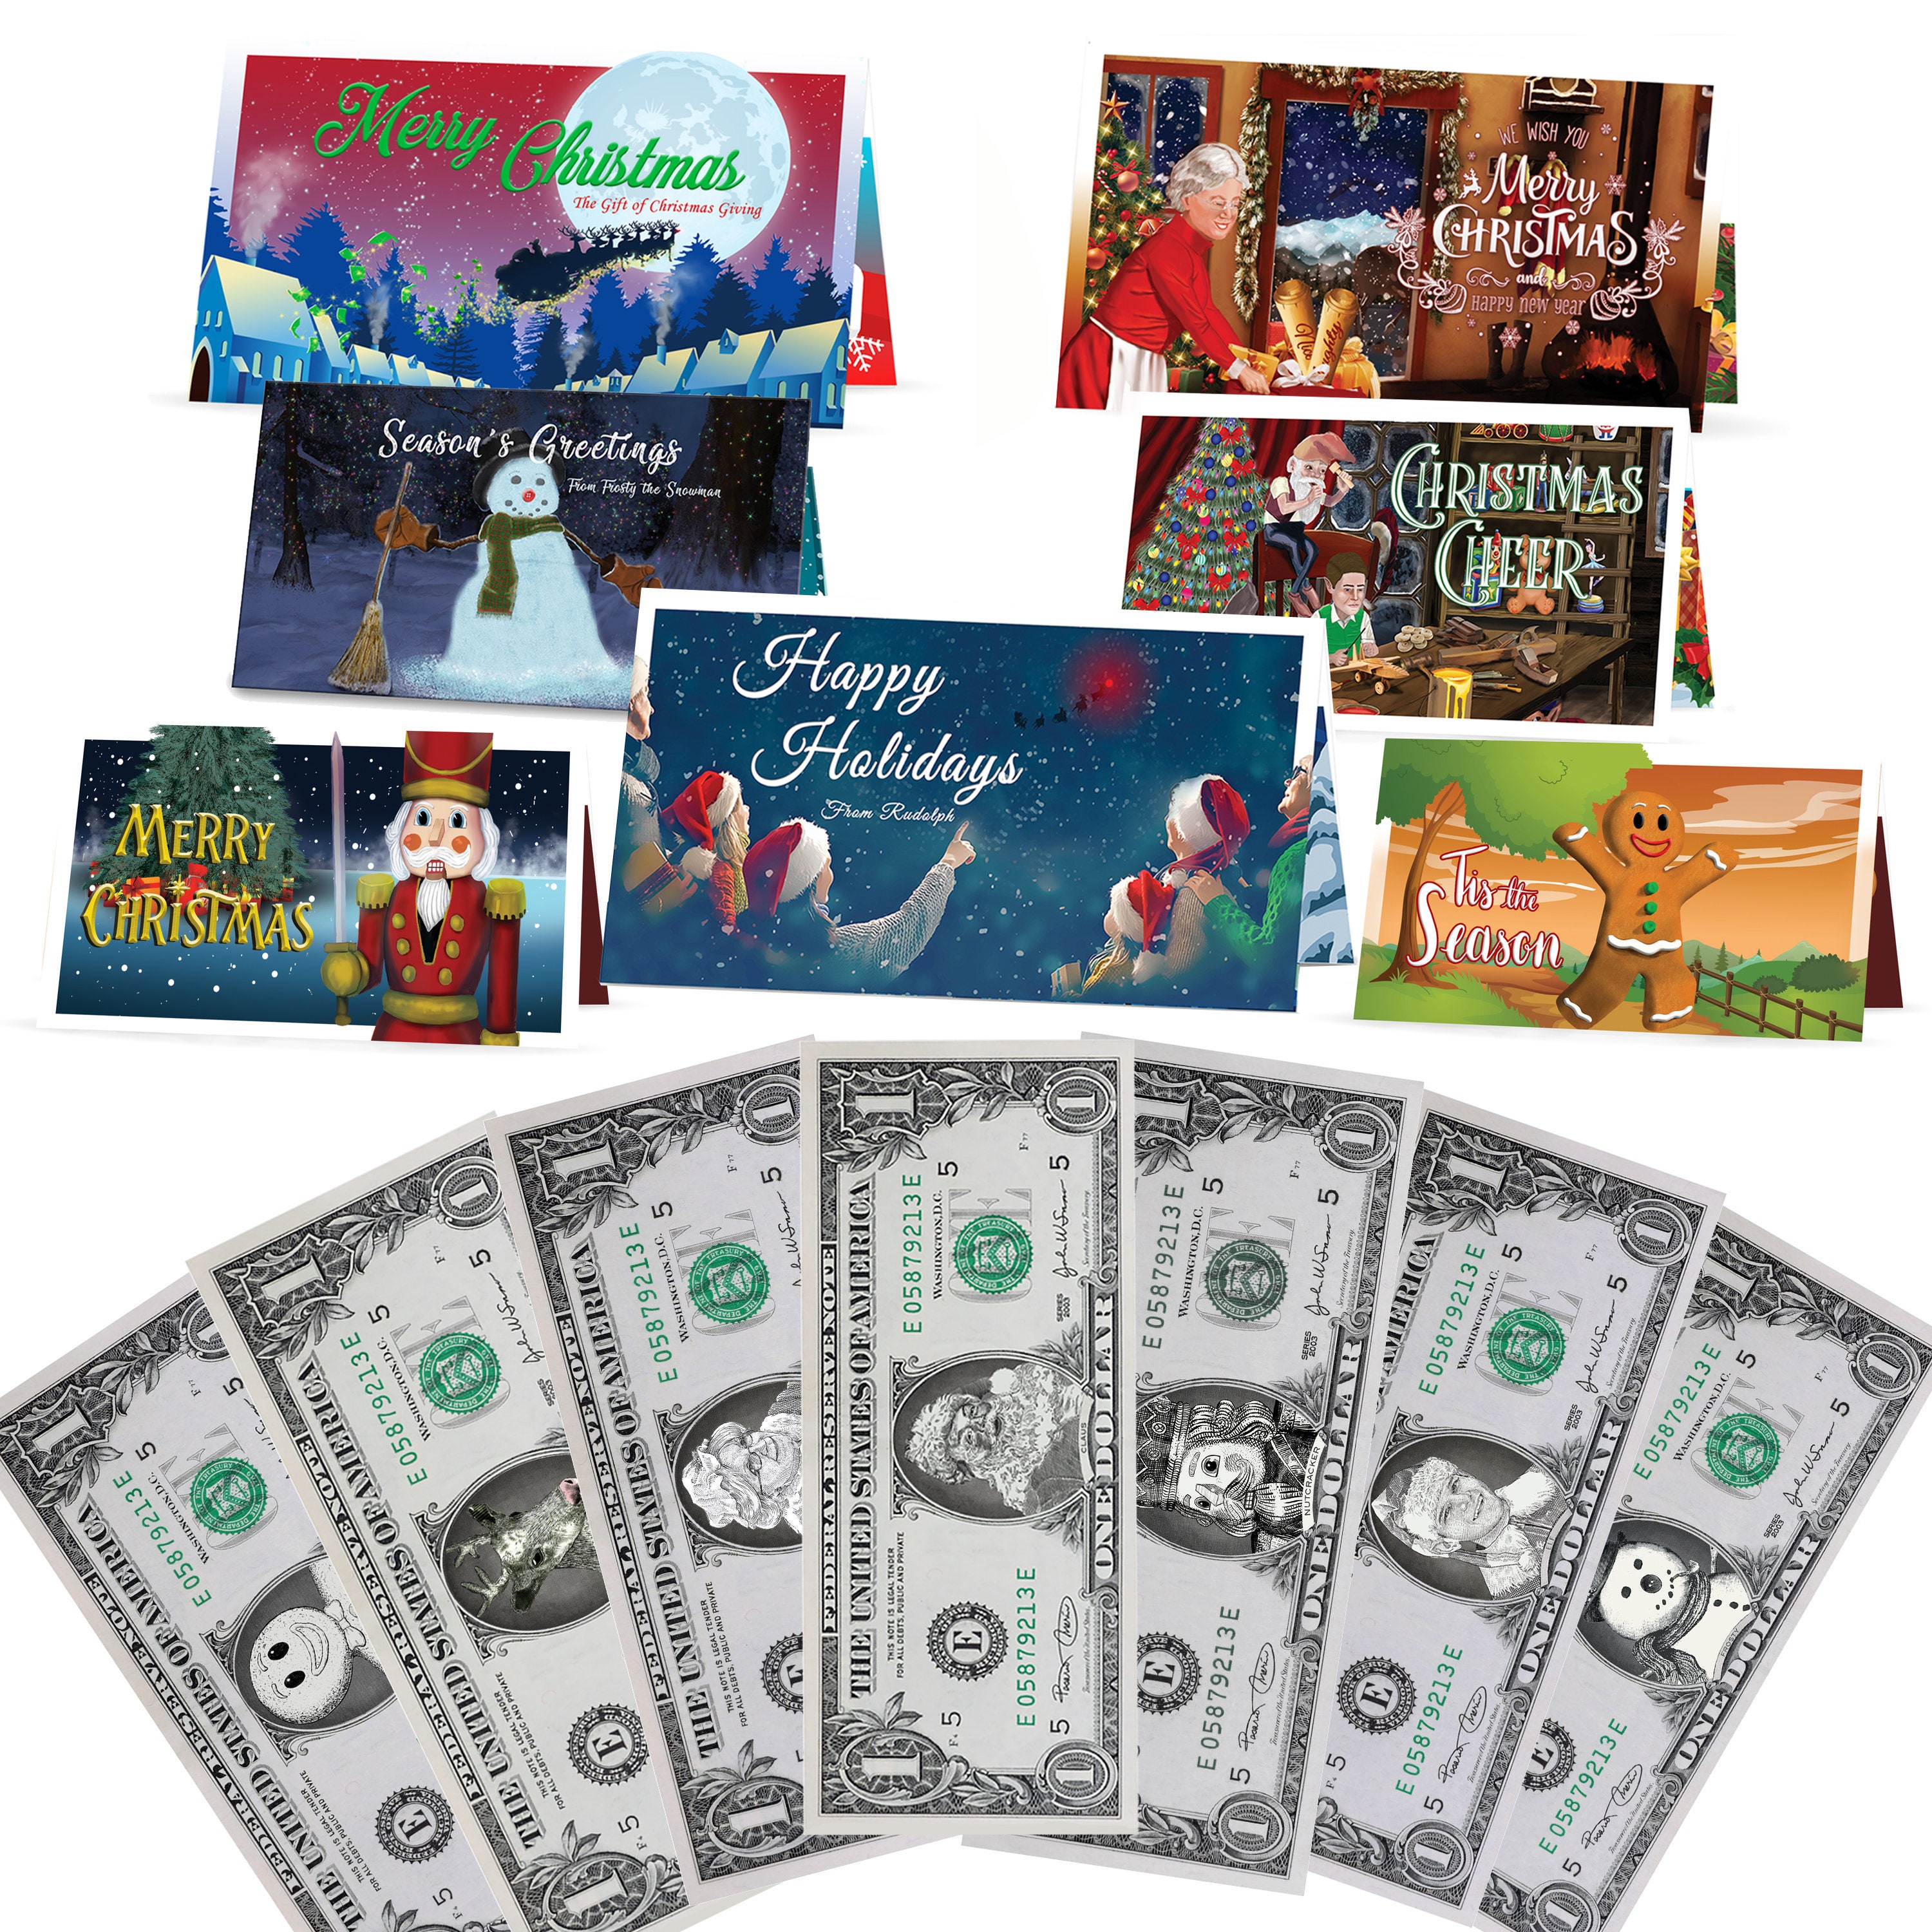 Tooth Fairy 5.0 Dollar Bill Tooth Fairy Gift withTooth Fairy Letter/Card.  REAL USD. The Complete Tooth Fairy Visit Gift Package